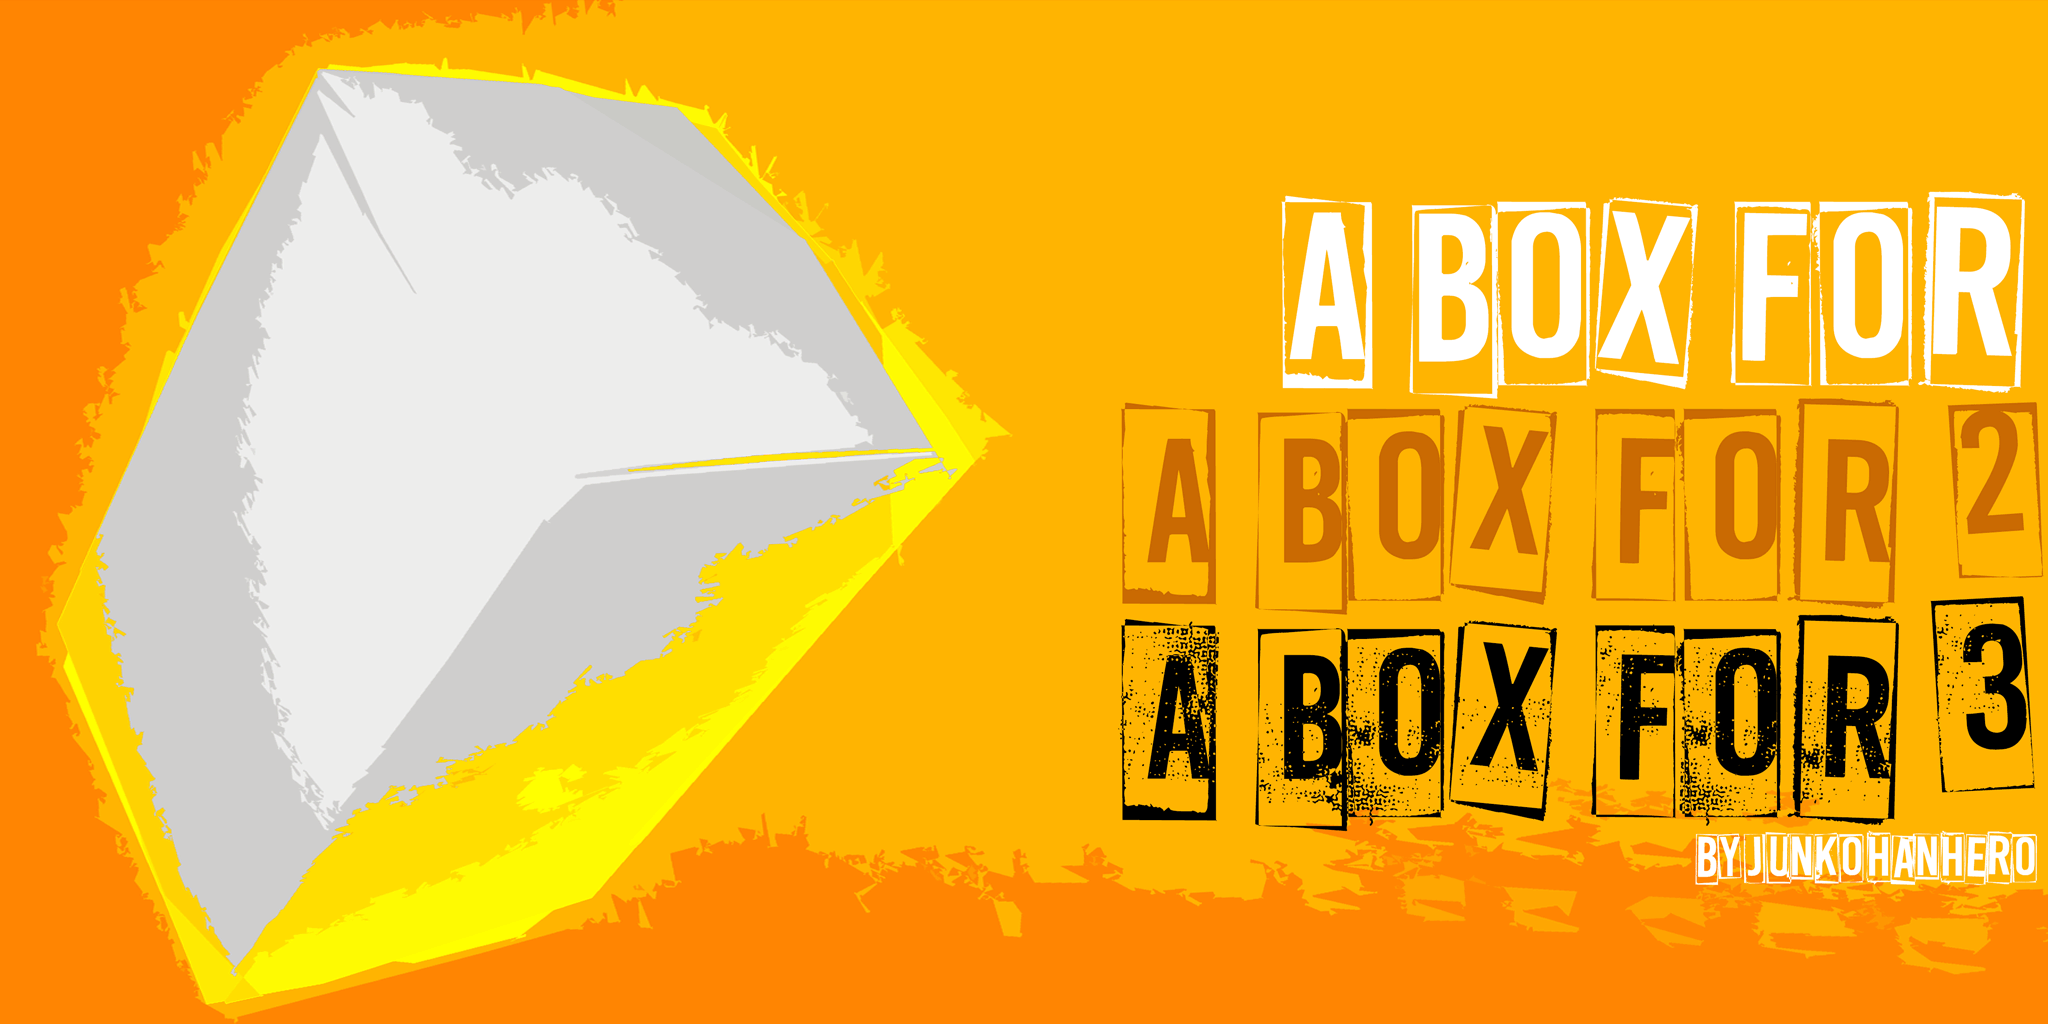 A Box For